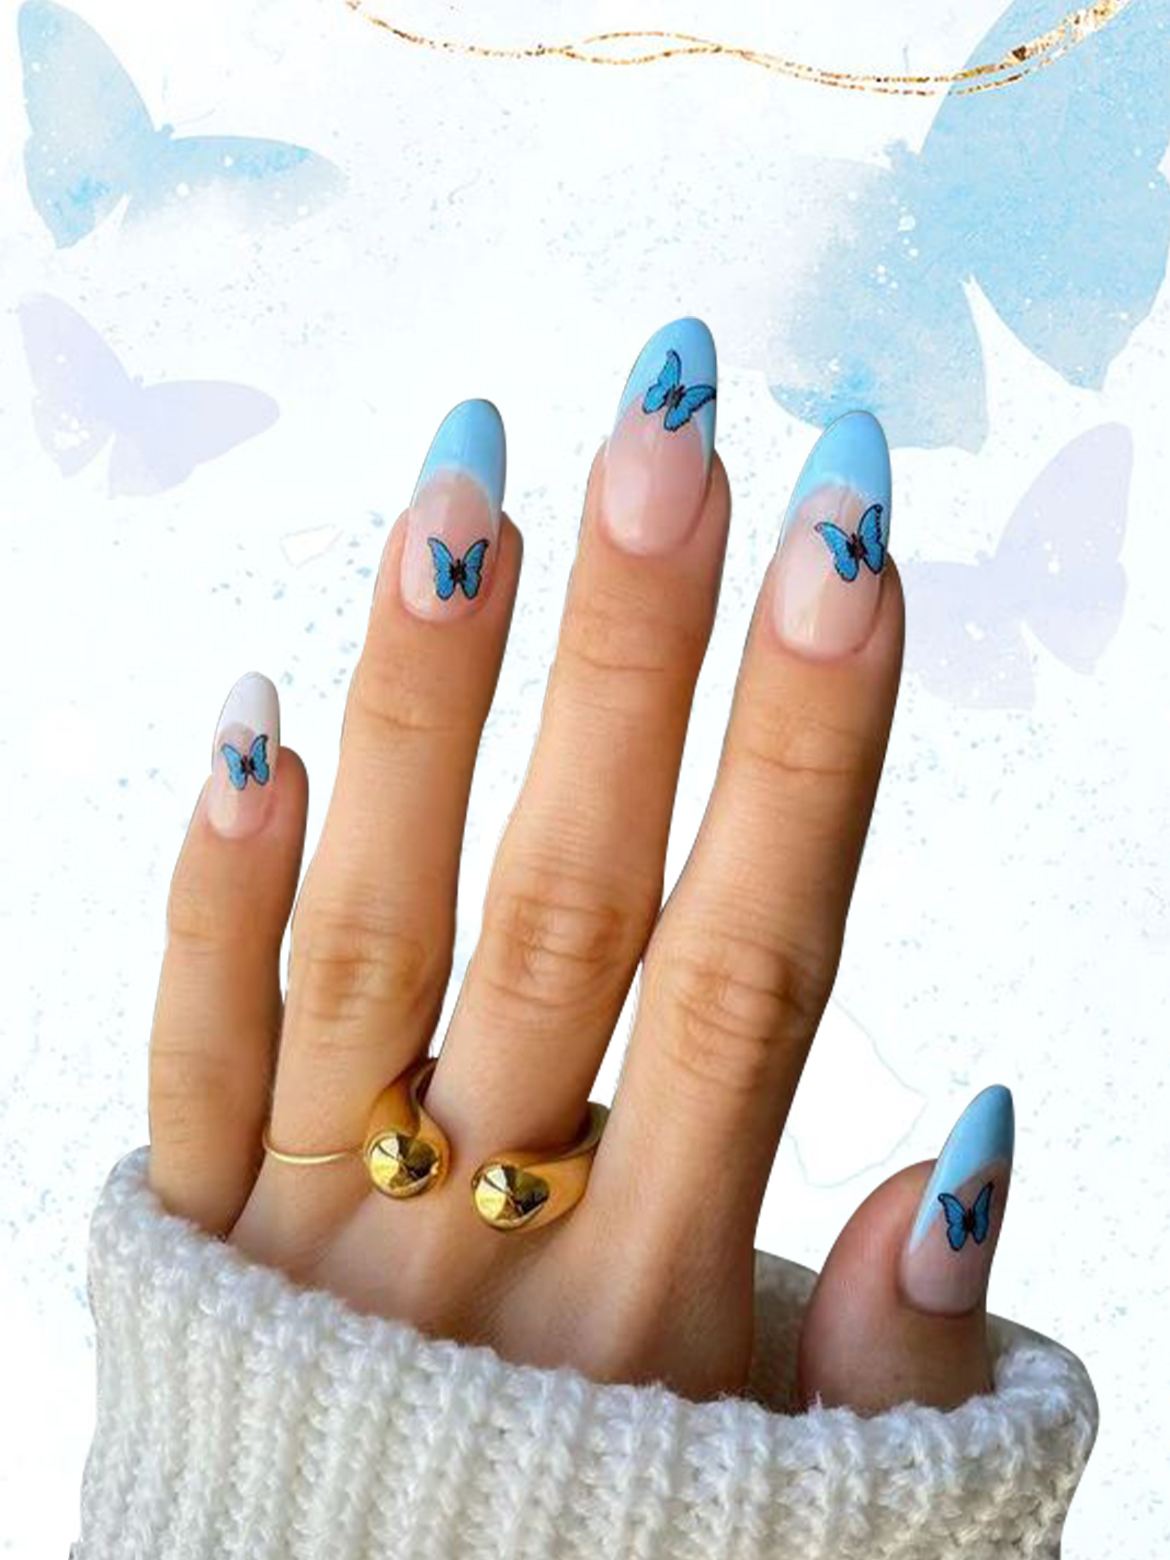 20 March Manicure Ideas For Every Style